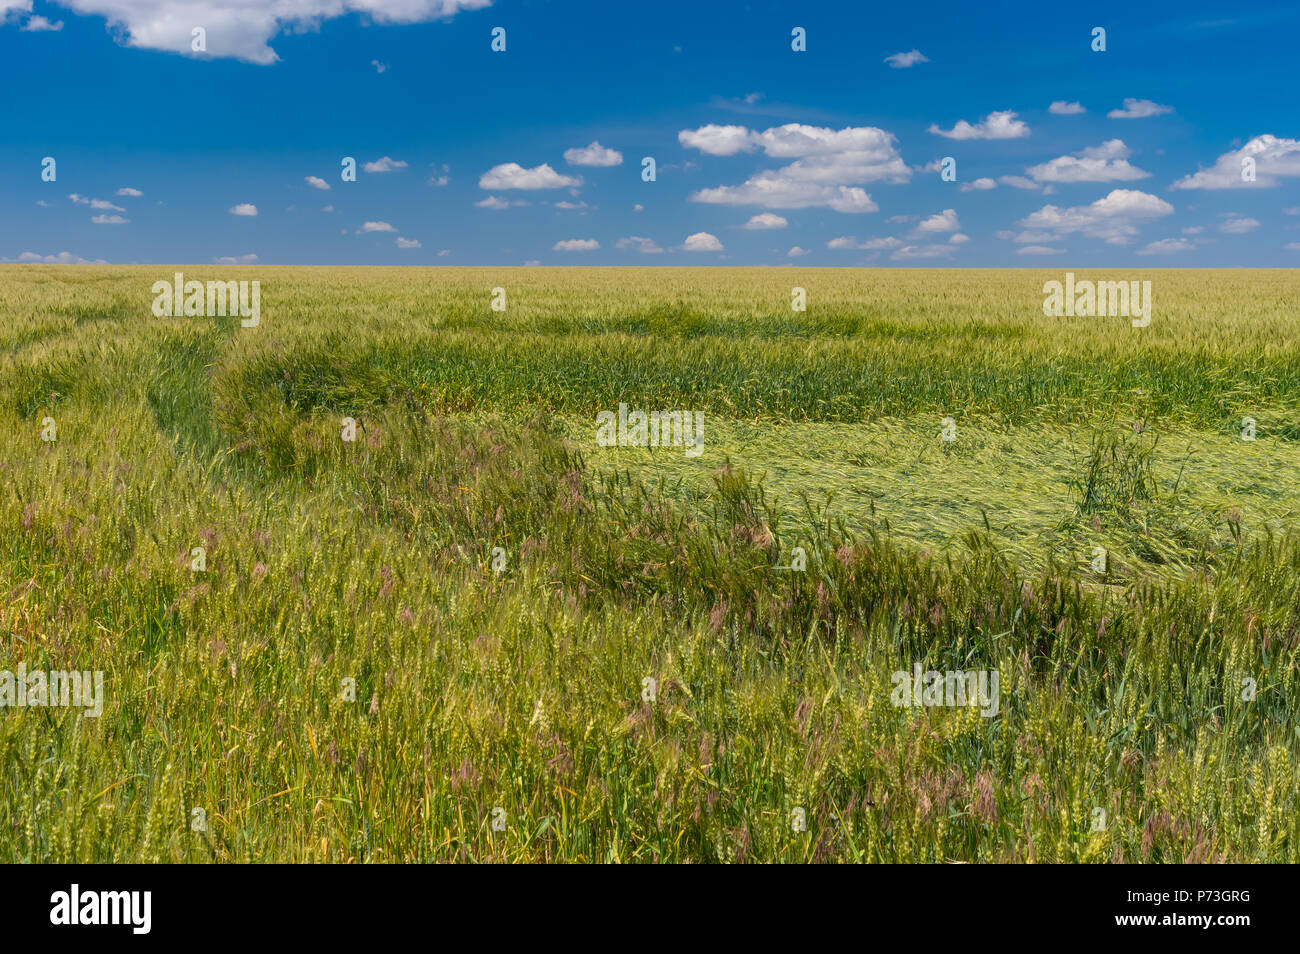 Field with unripe wheat tumbled down by rain and wind at summer season Stock Photo